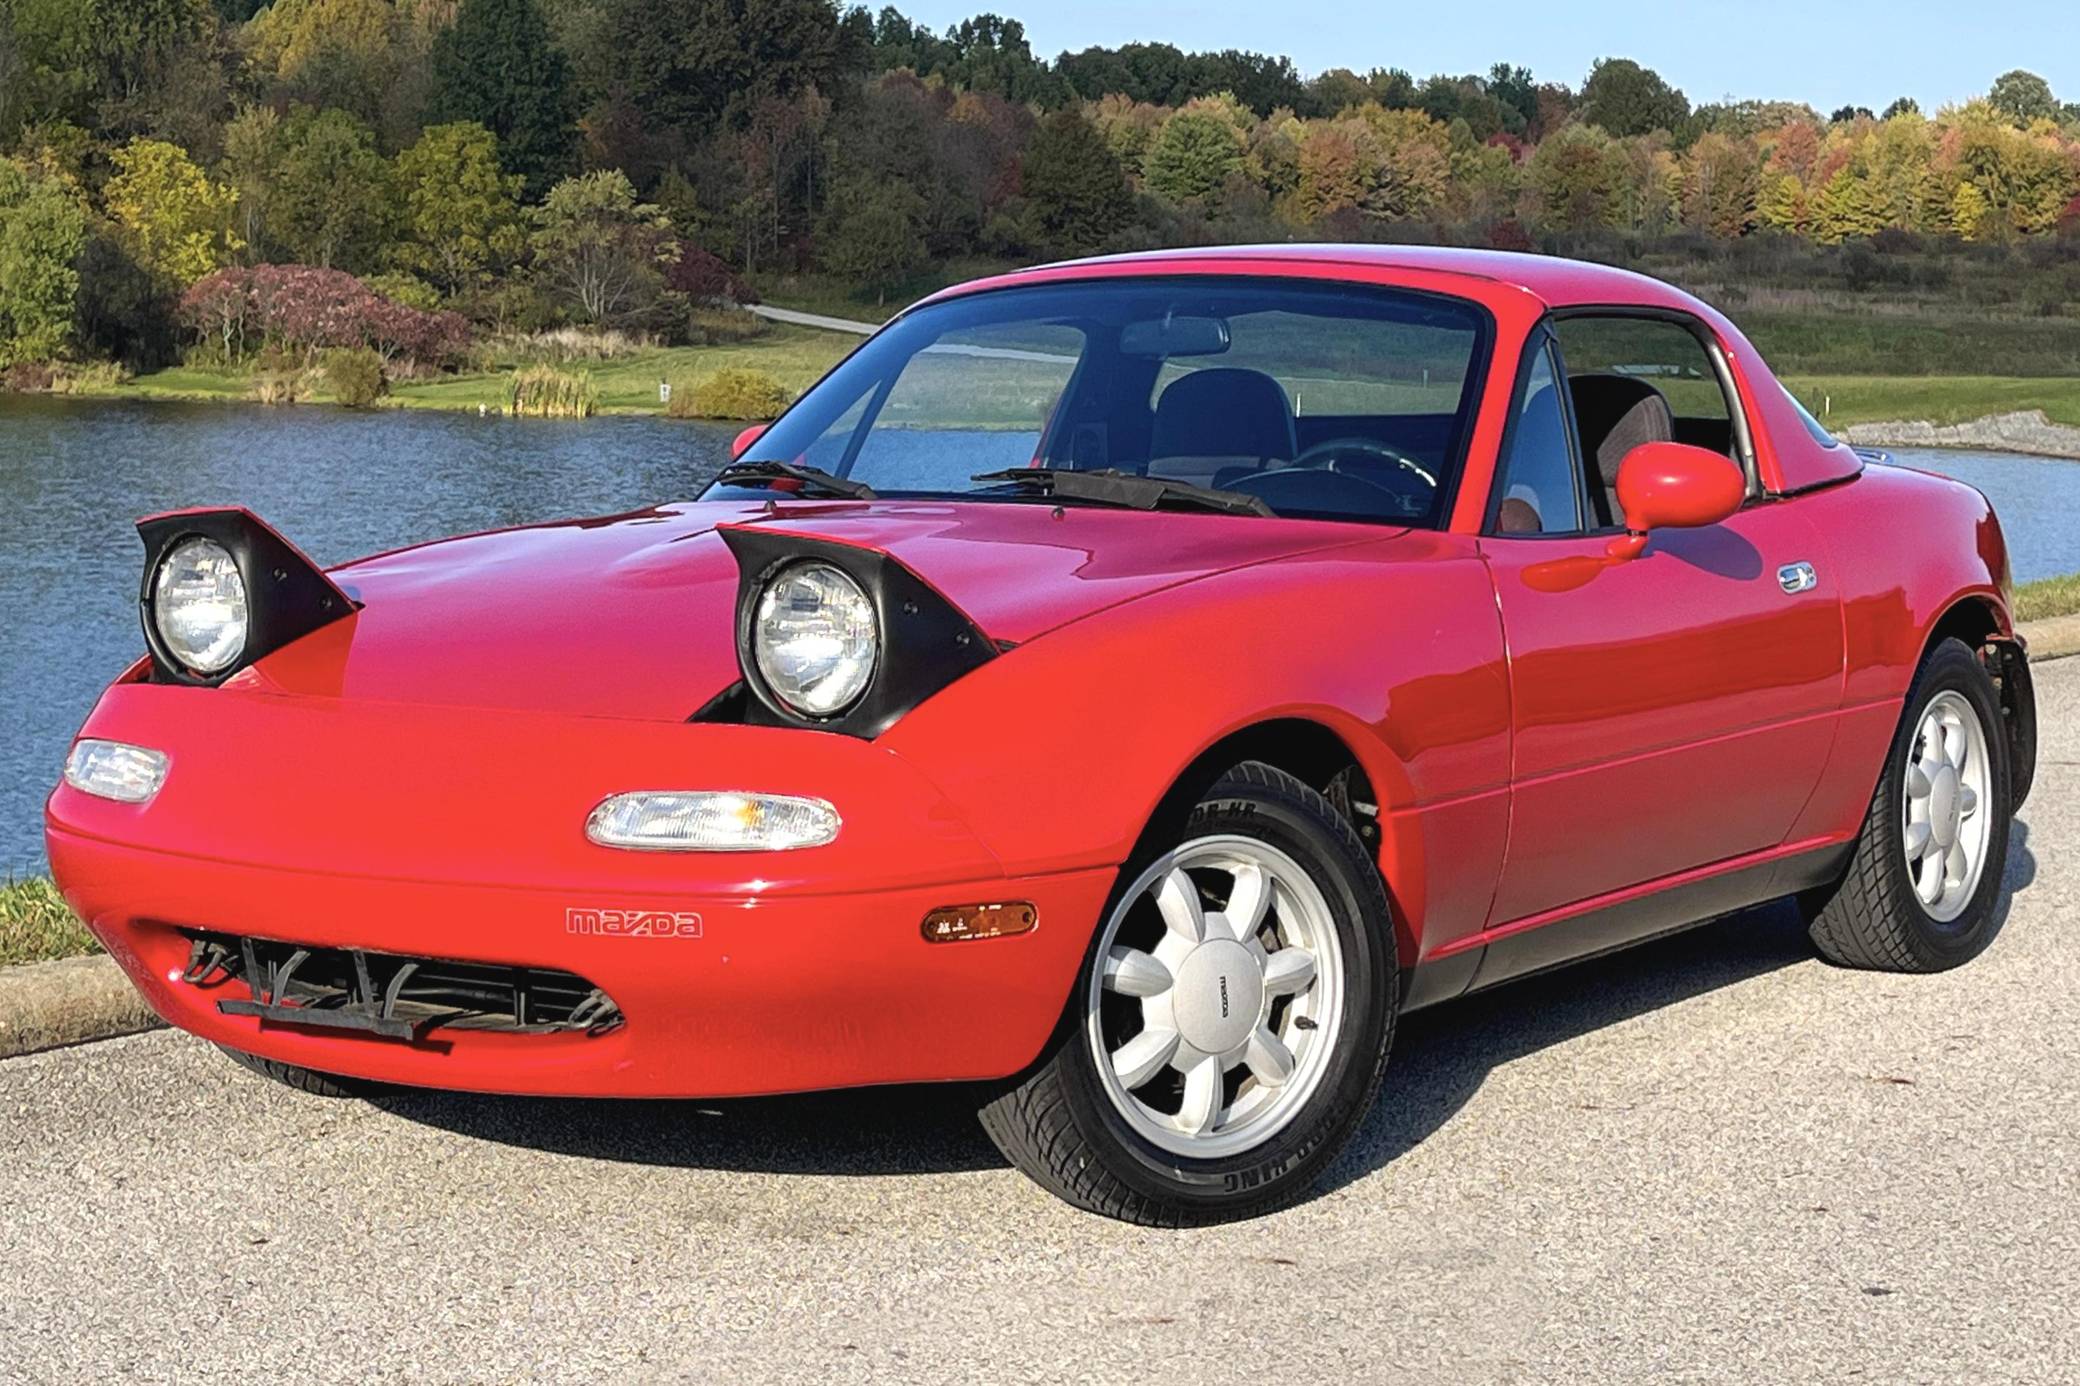 Why Does This New Mazda Miata Have Pop-up Headlights